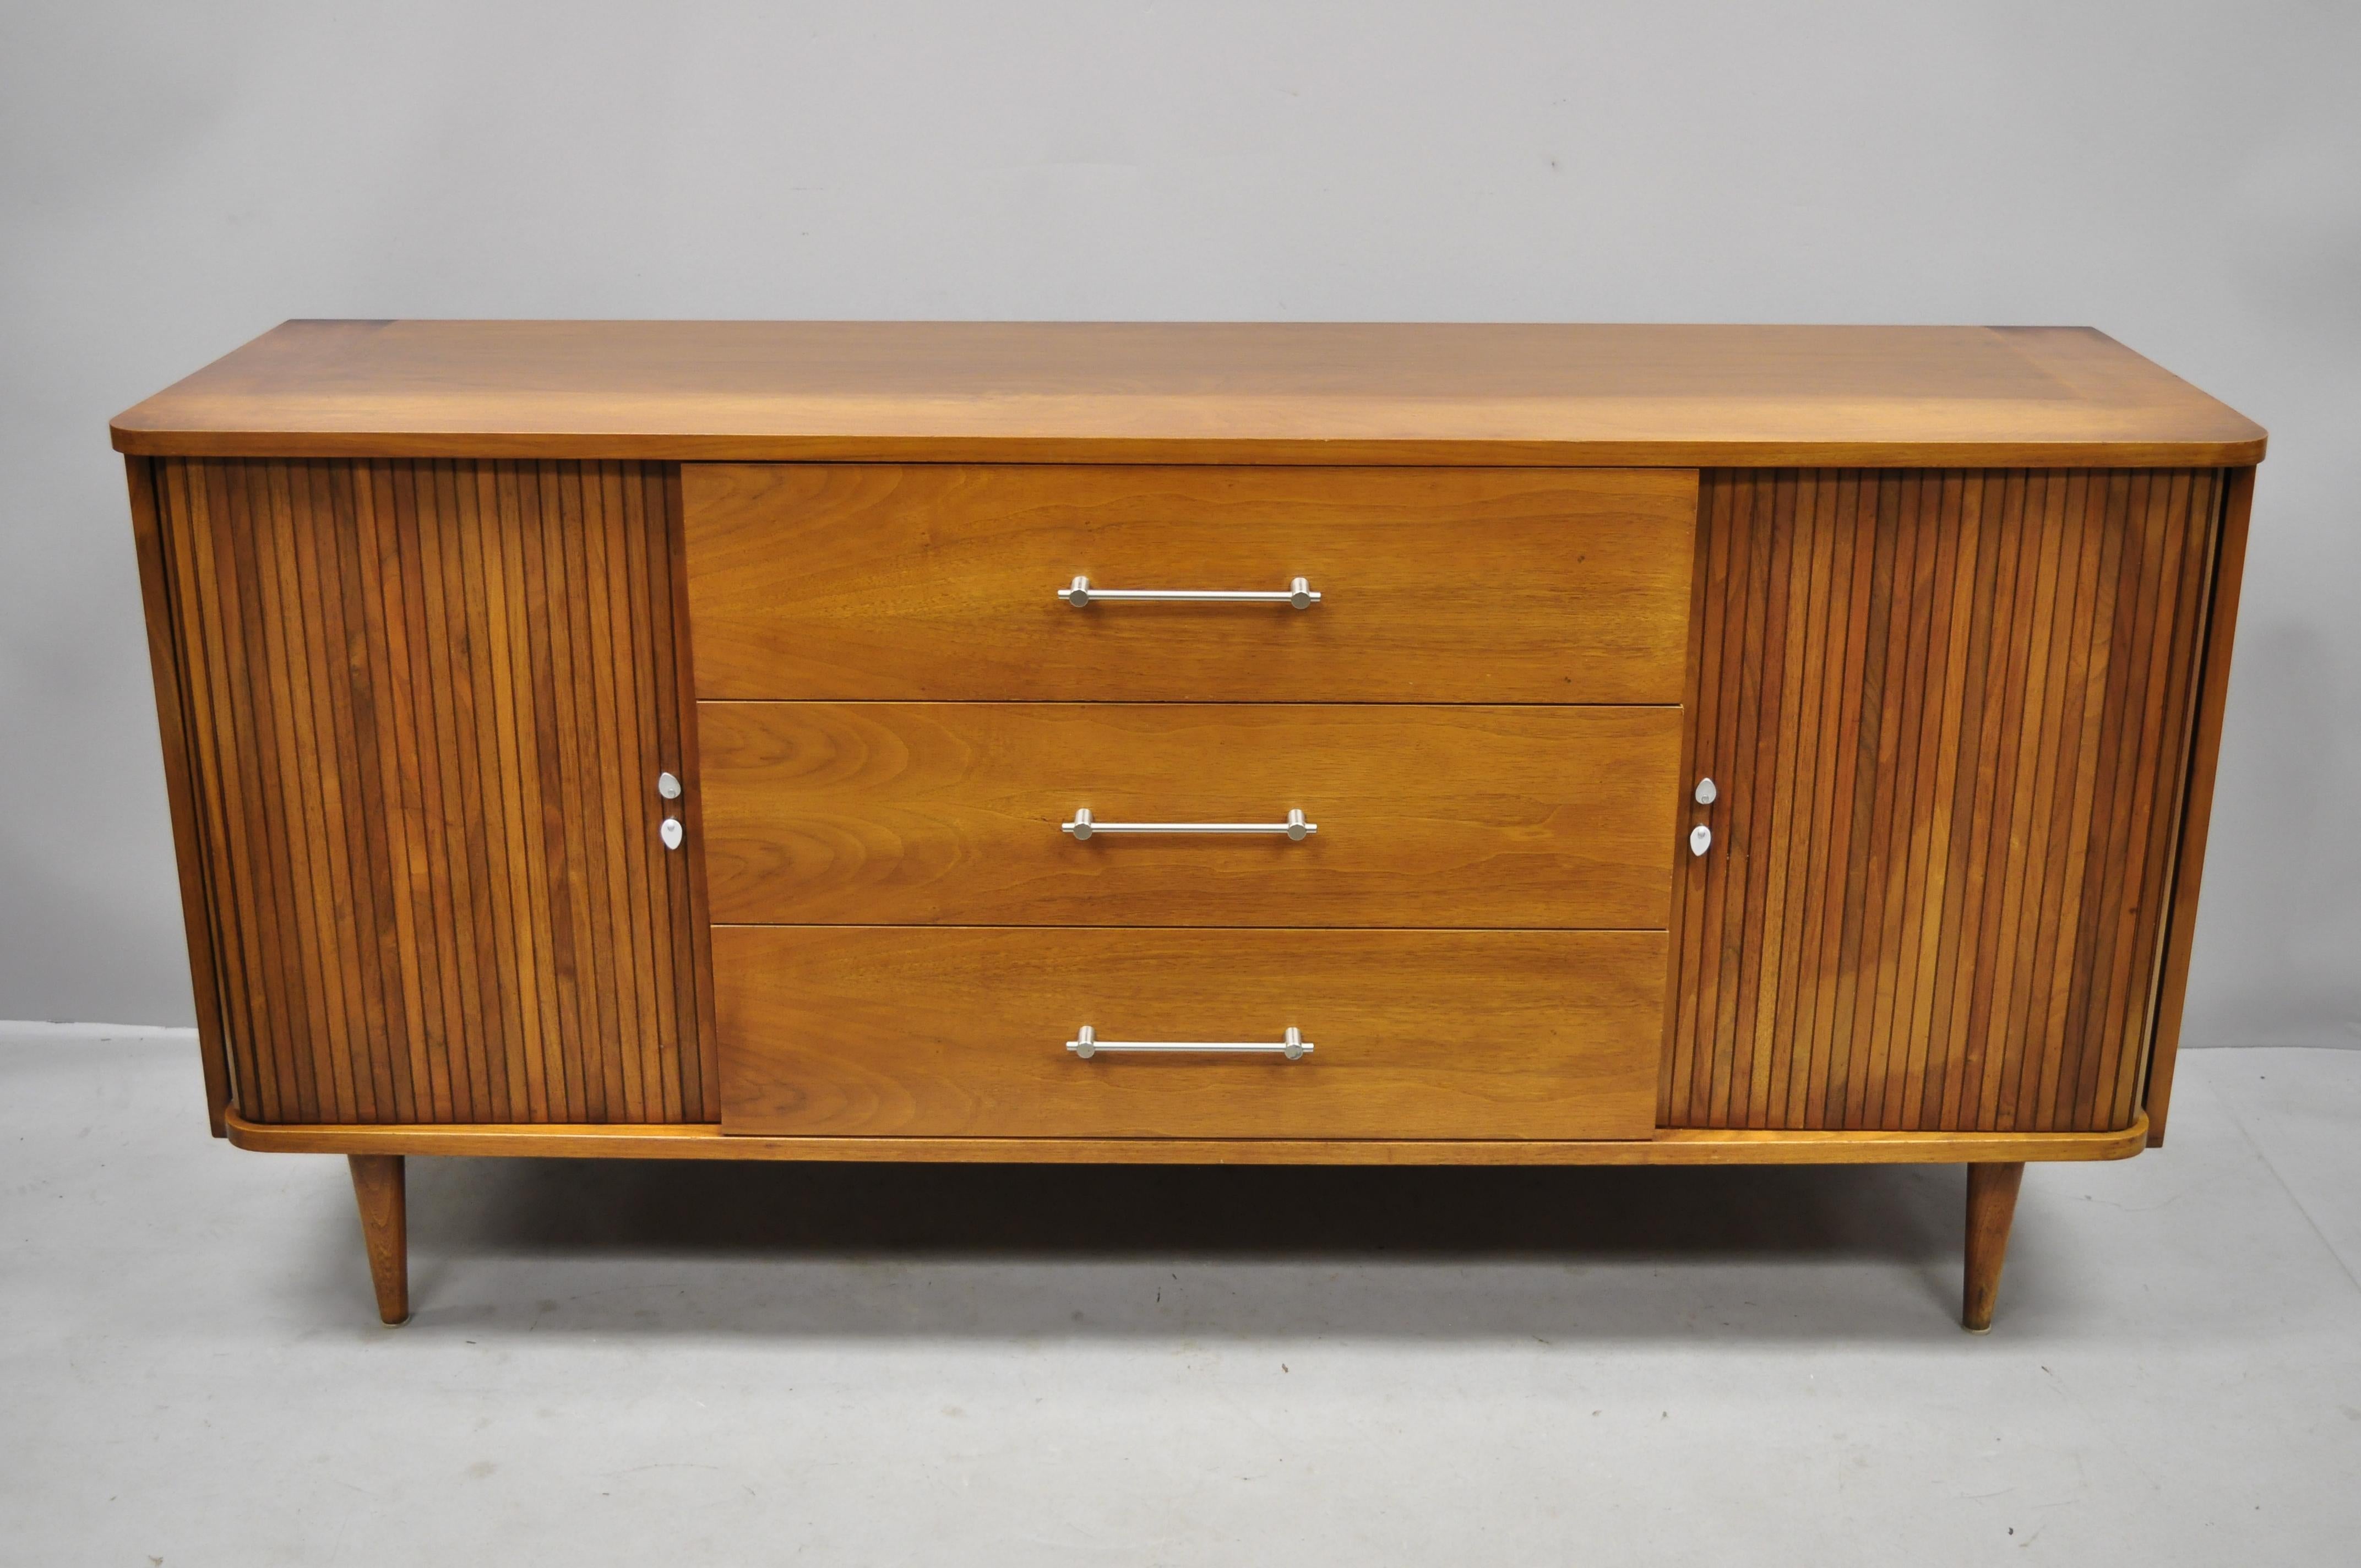 Vintage Mid-Century Modern walnut tambour sliding door Credenza cabinet John Cameron. Item features two tambour sliding doors, beautiful wood grain, 4 dovetailed drawers, tapered legs, clean modernist lines, quality American craftsmanship, circa